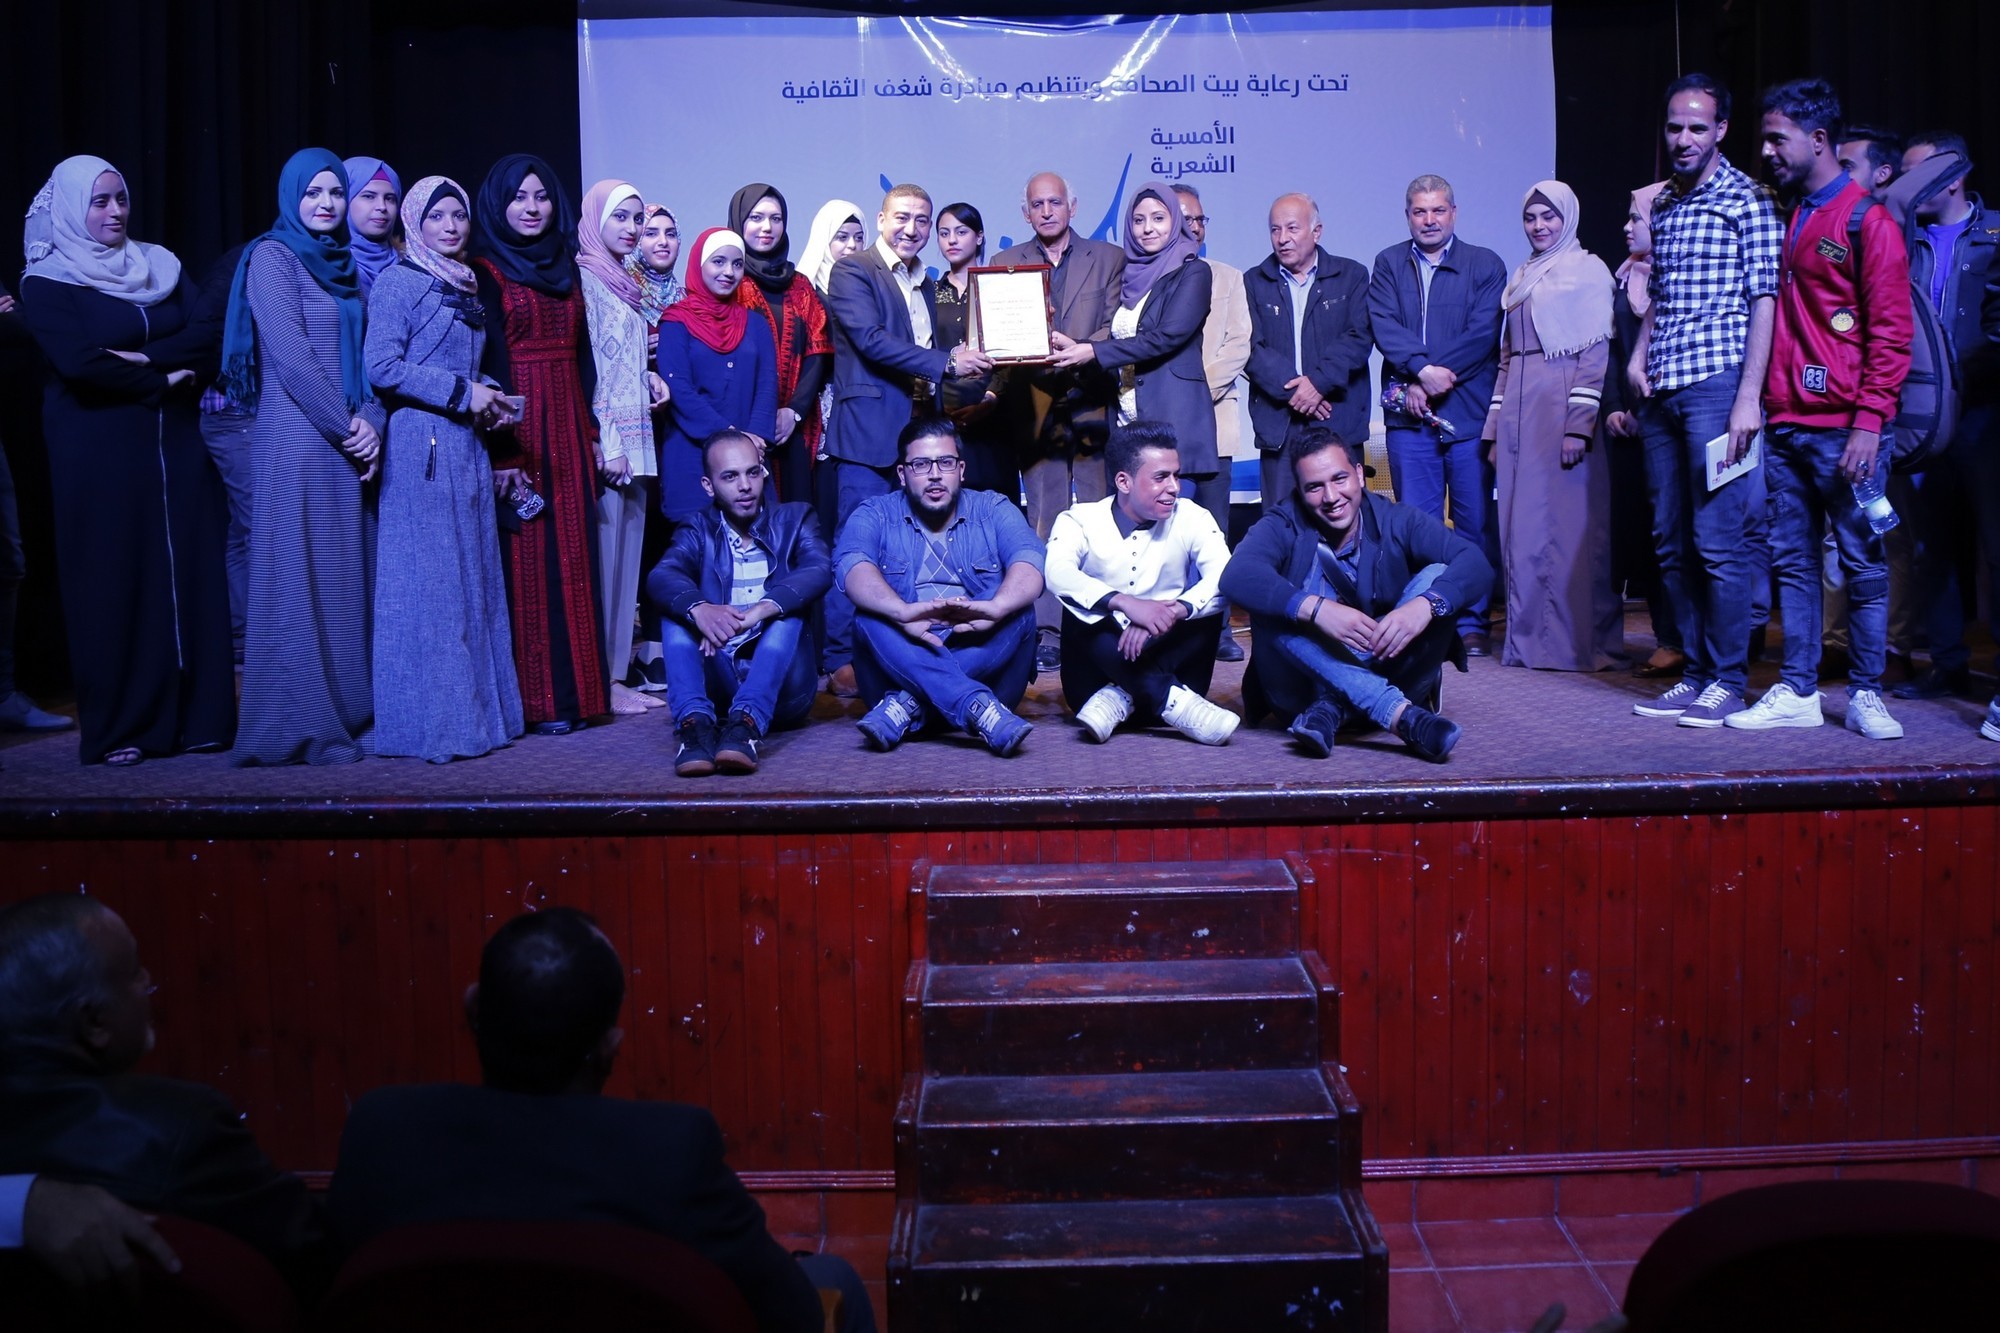 The cultural "Shaghaf" team organizes a poetry evening under the patronage of the Press House